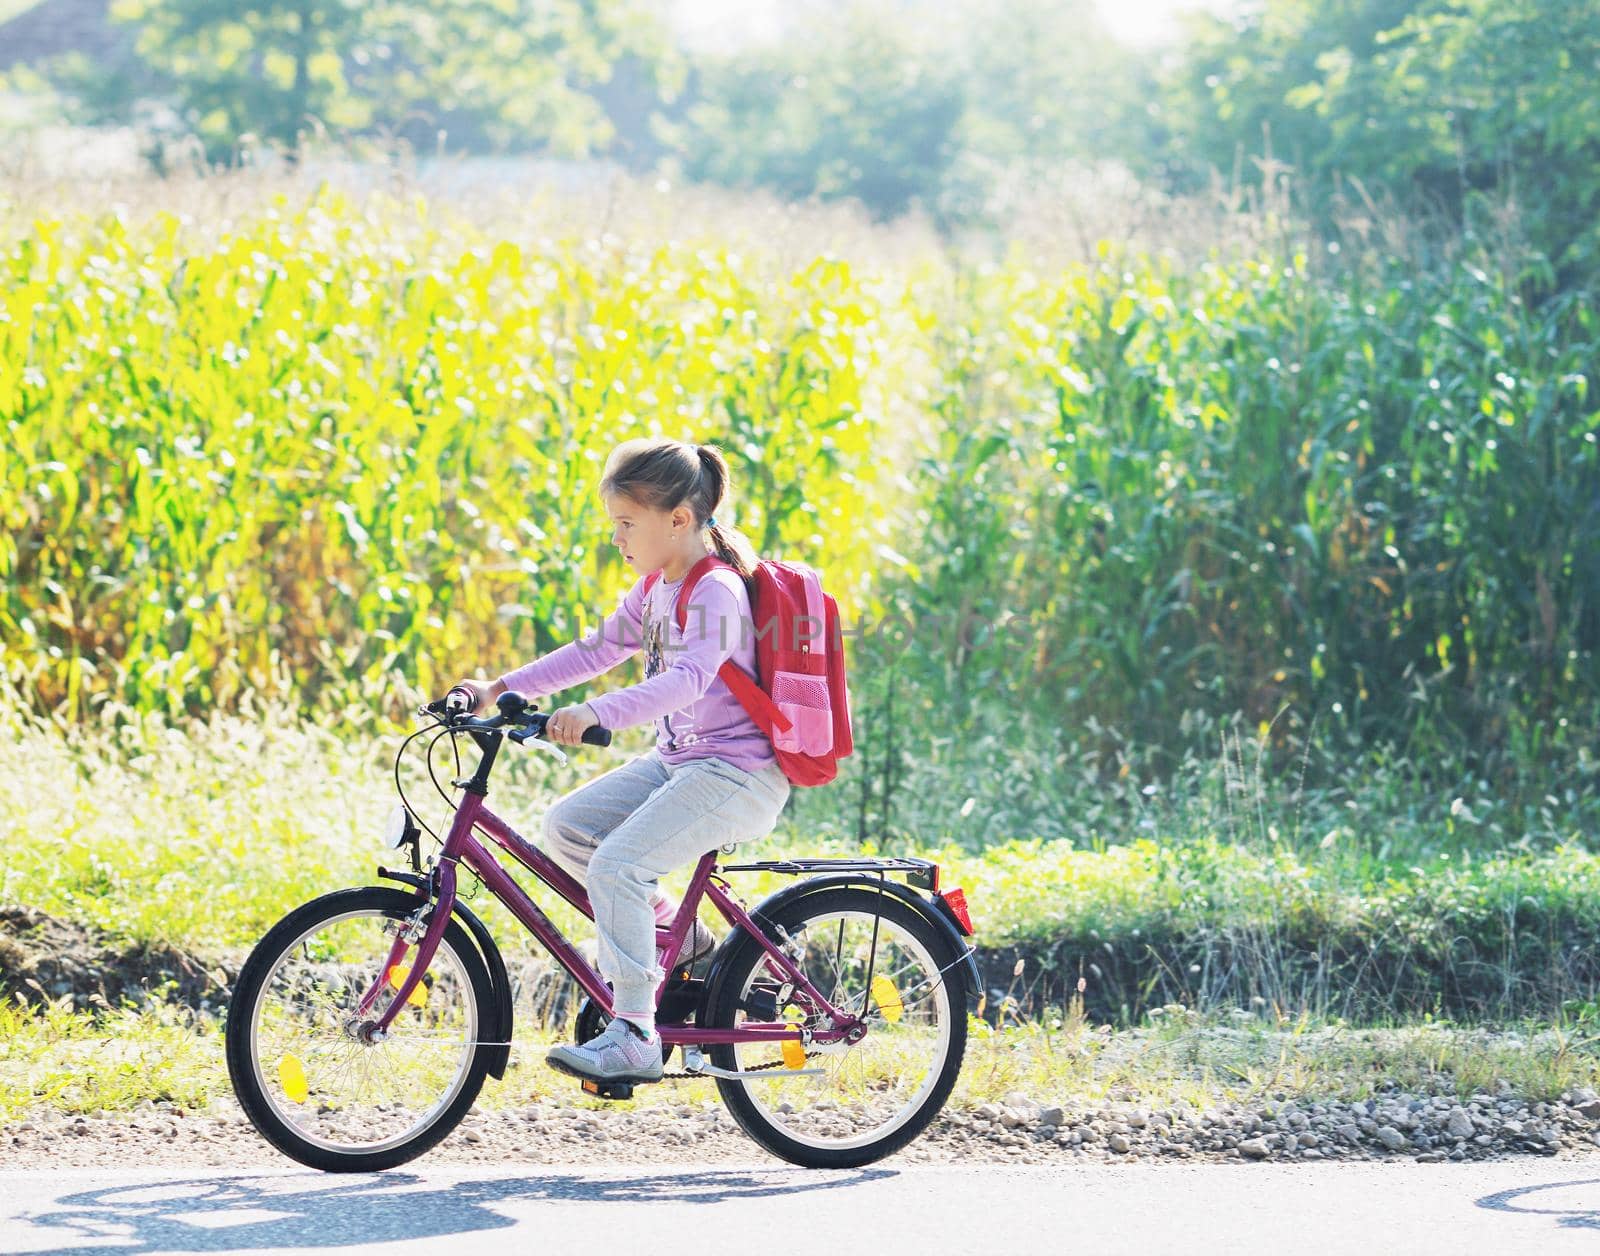 schoolgirl traveling to school on bicycle at early morning on beautiful nature